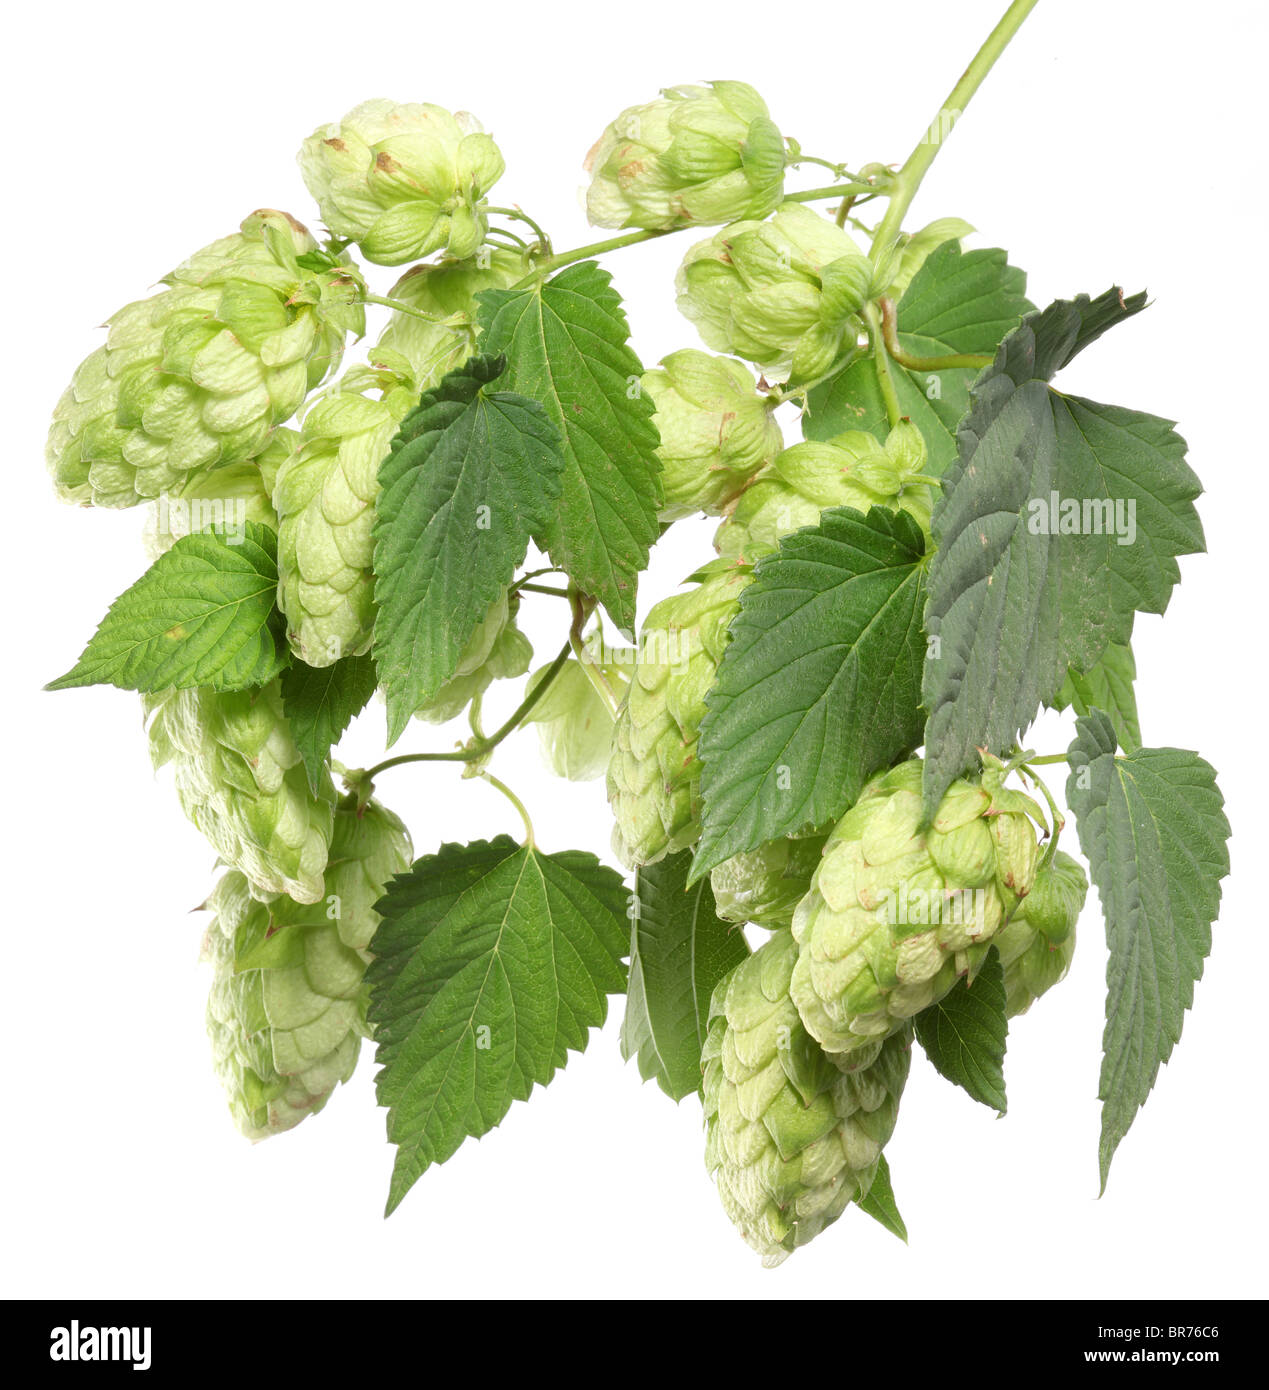 branch of hops on a white background Stock Photo